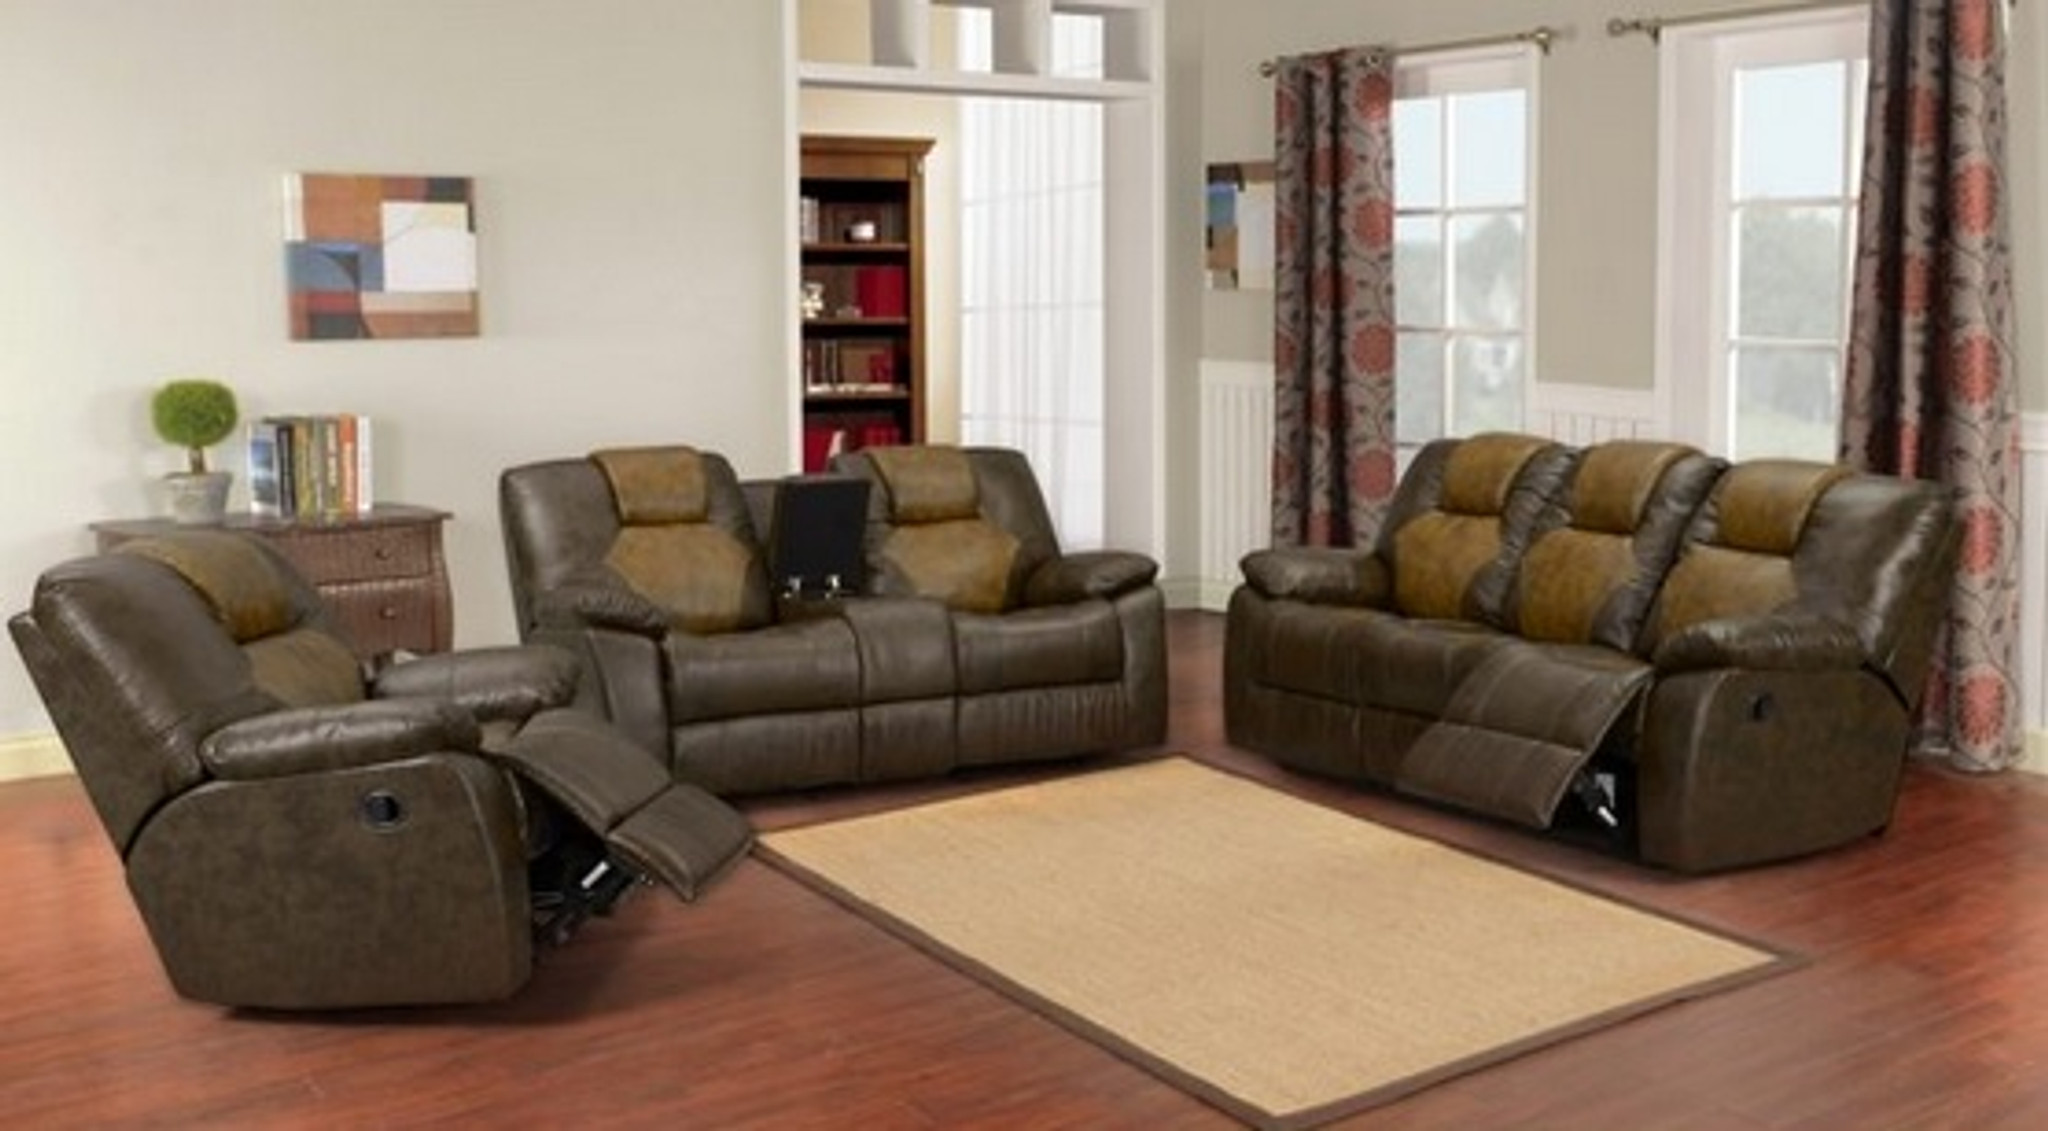 3PC BRANTLEY TWO TONE LEATHER RECLINING SET KM Home Furniture Mattress